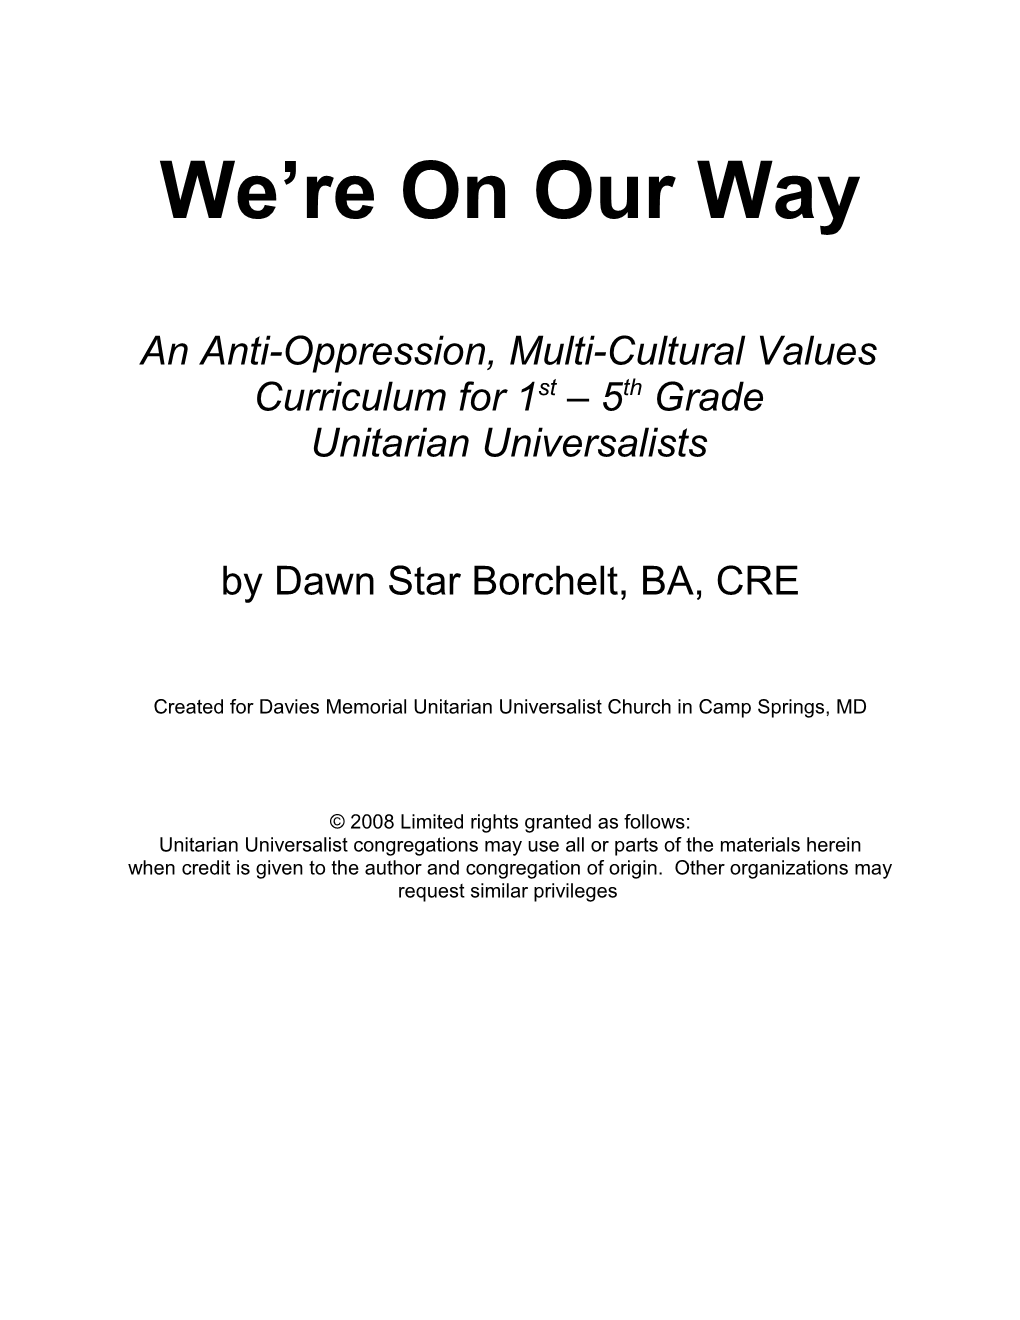 An Anti-Oppression, Multi-Cultural Values Curriculum for 1St 5Th Grade